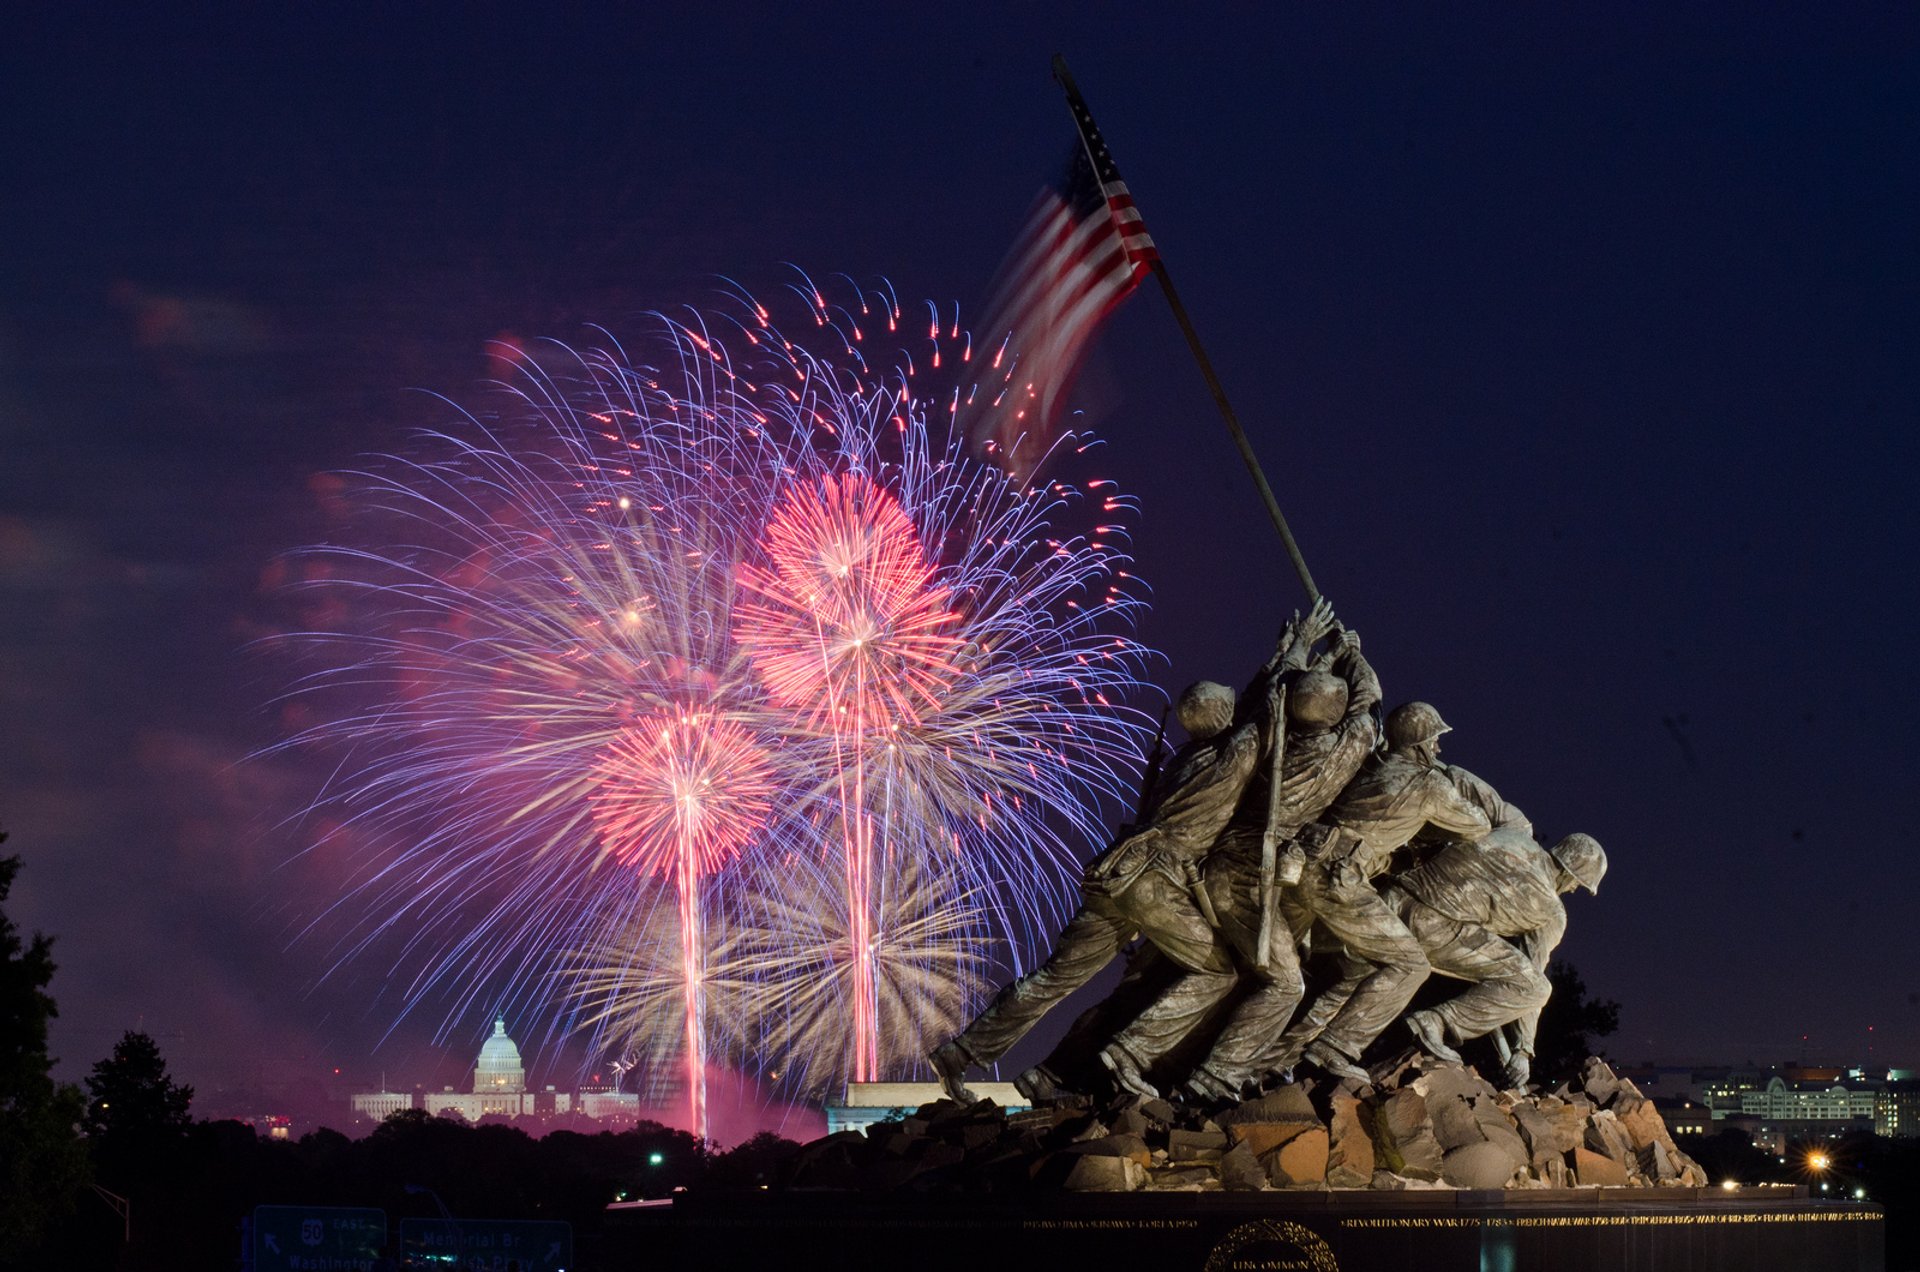 Marine Corps Iwo Jima flag raising monument in Washington D.C. at night with fireworks in background